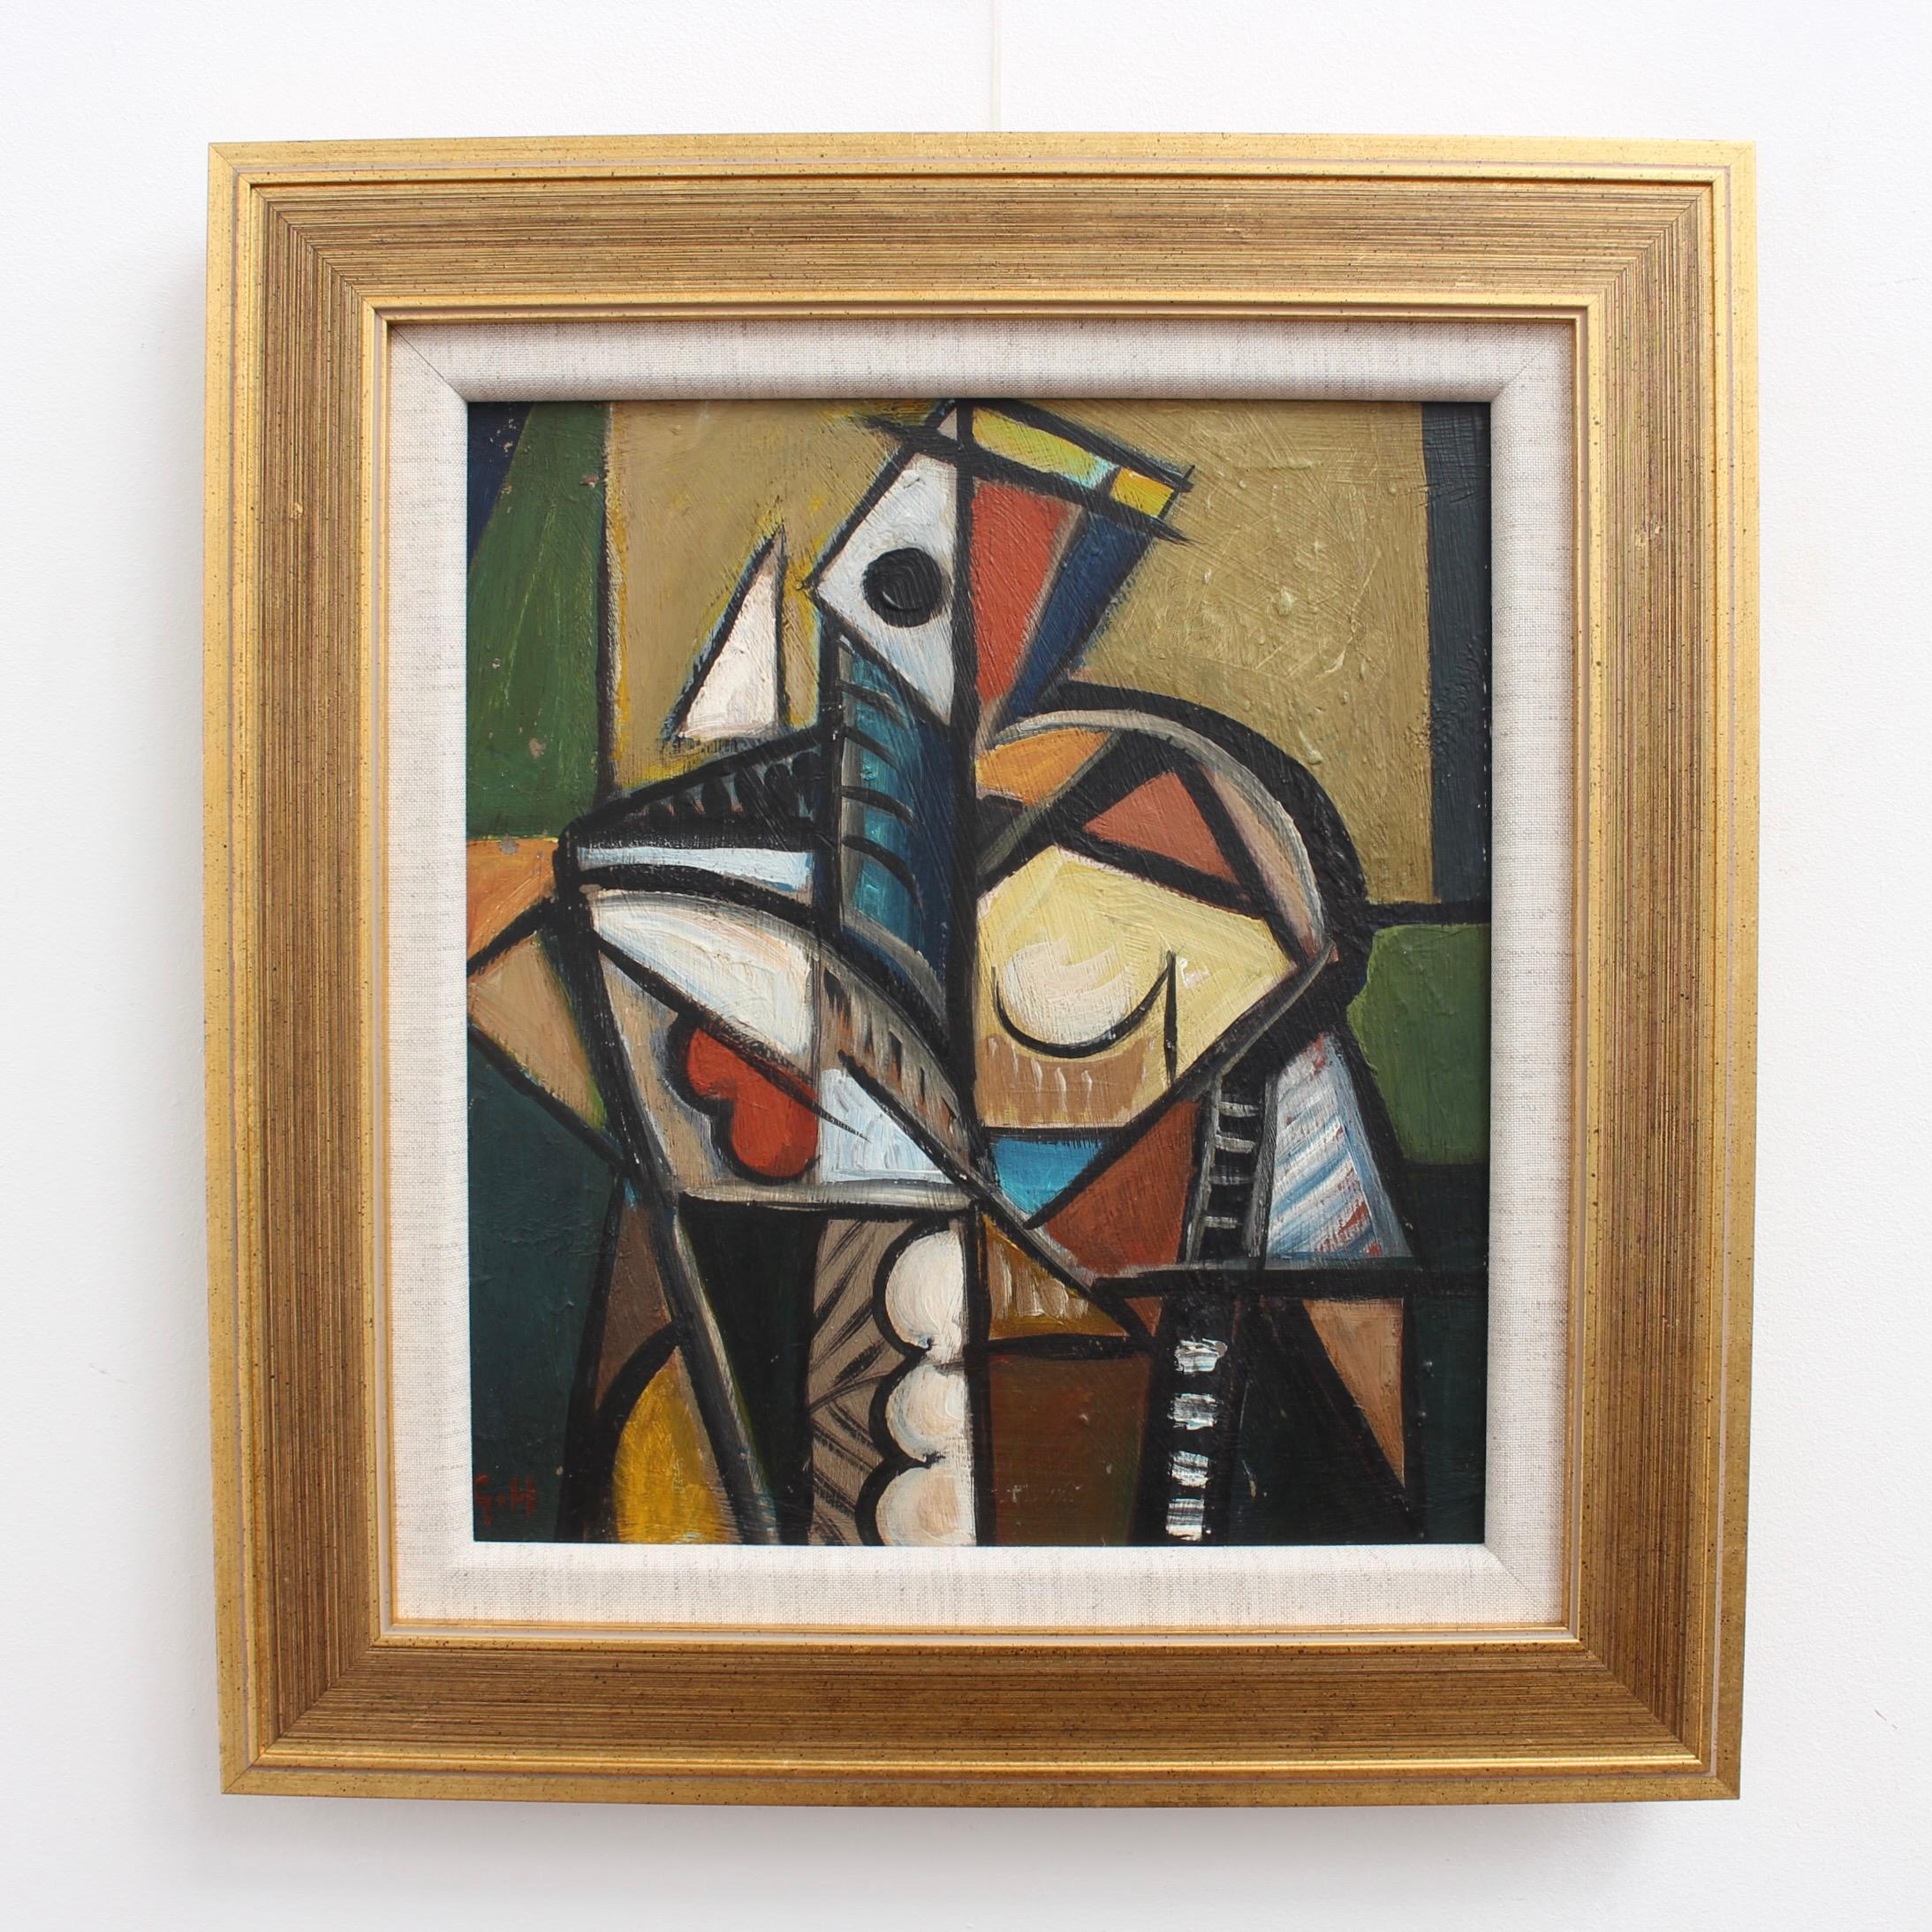 'Cubist Abstraction', Berlin School - Painting by Unknown